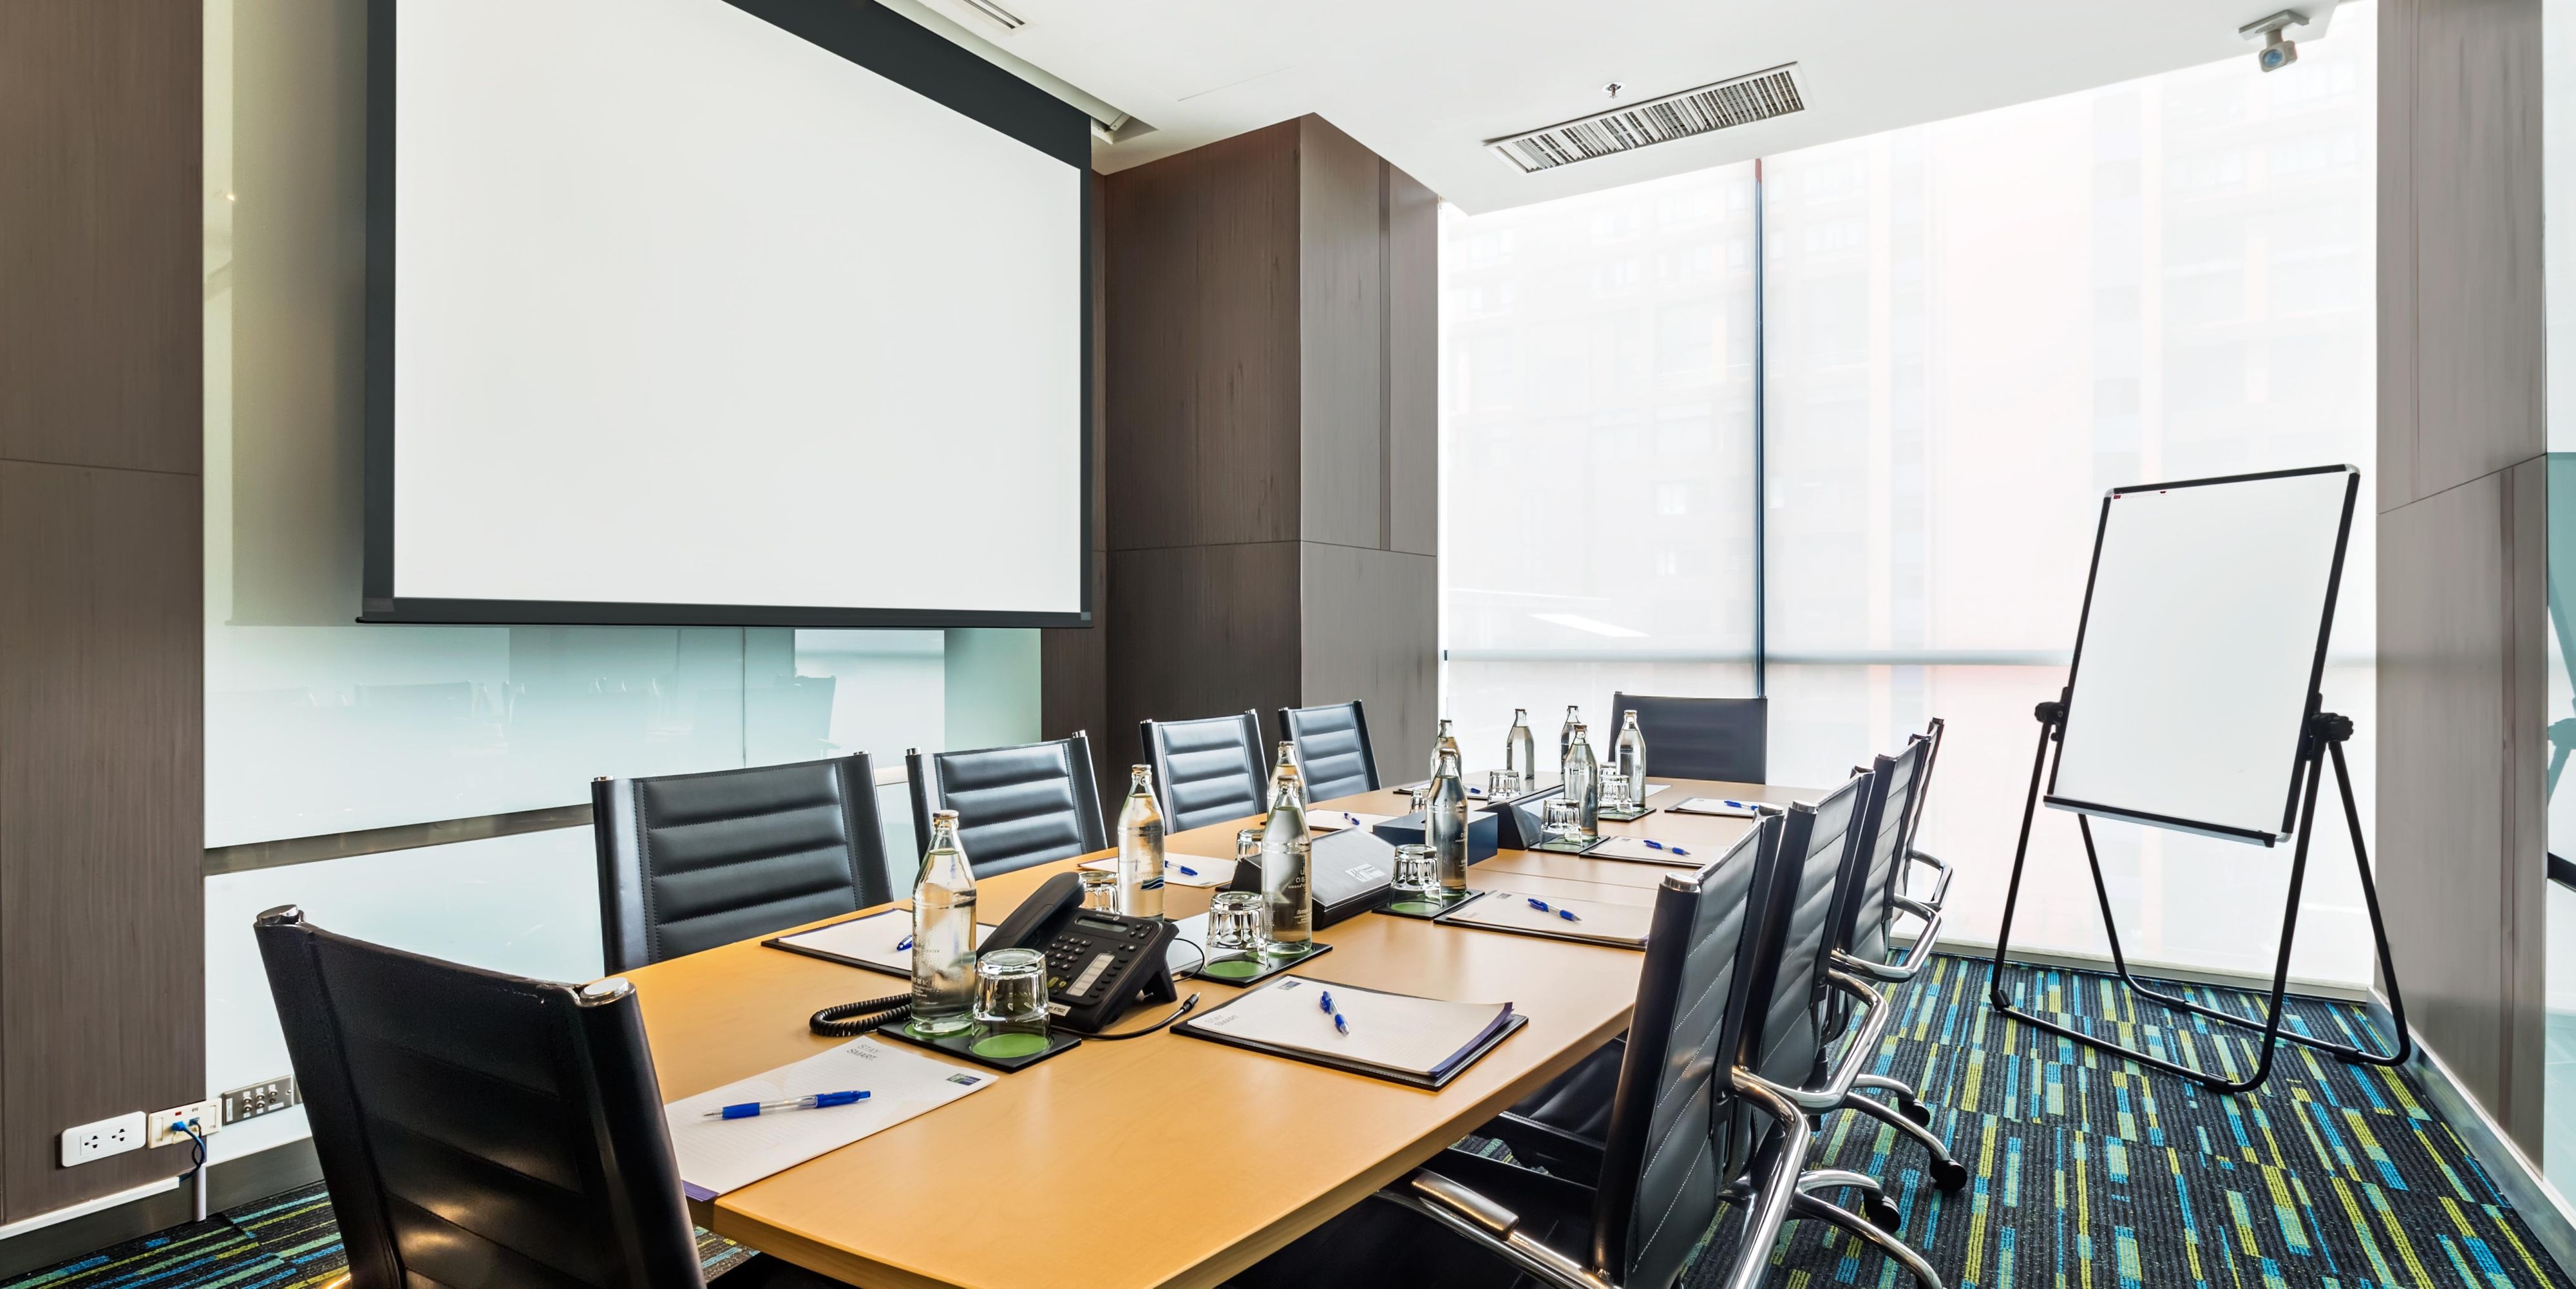 Make your meeting in Bangkok a success at Holiday Inn Express Bangkok Siam. Take advantage of our modern meeting room features natural daylight that can accommodate up to 10 persons with the latest technology and equipment provided.